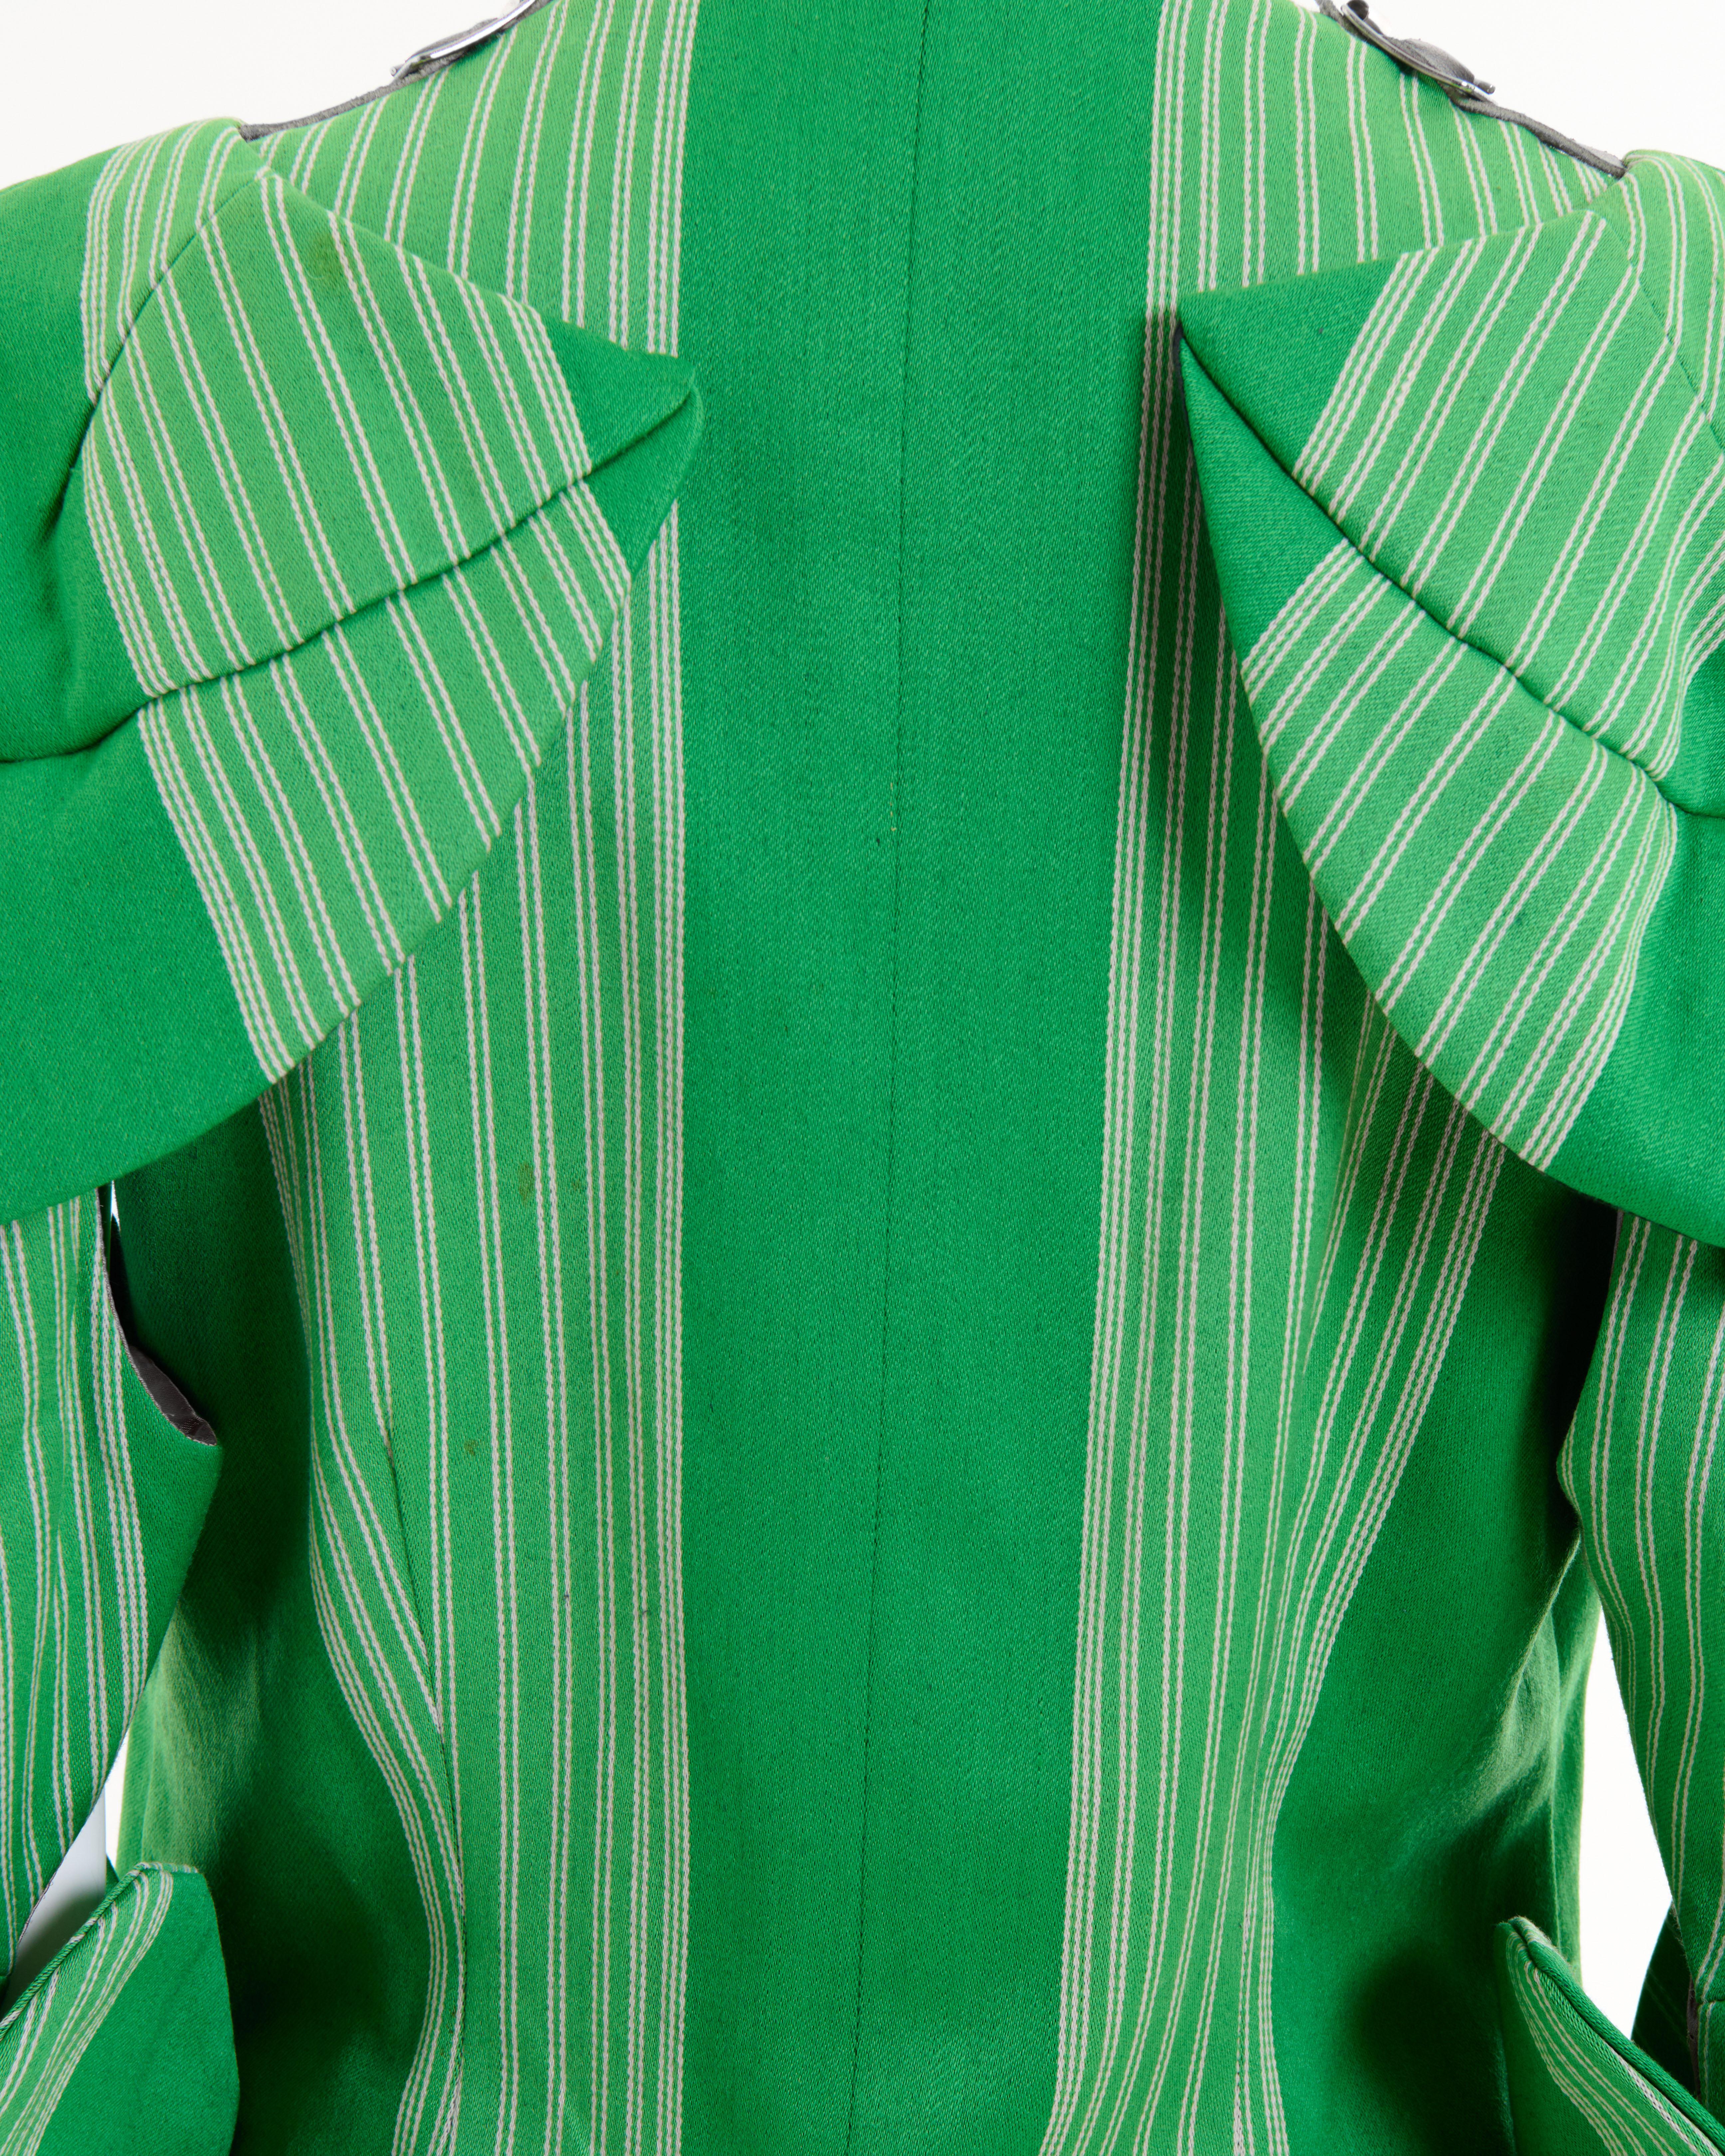 Vivienne Westwood  F/W 1988/89 ‘Time Machine’ Green striped Armour jacket For Sale 5